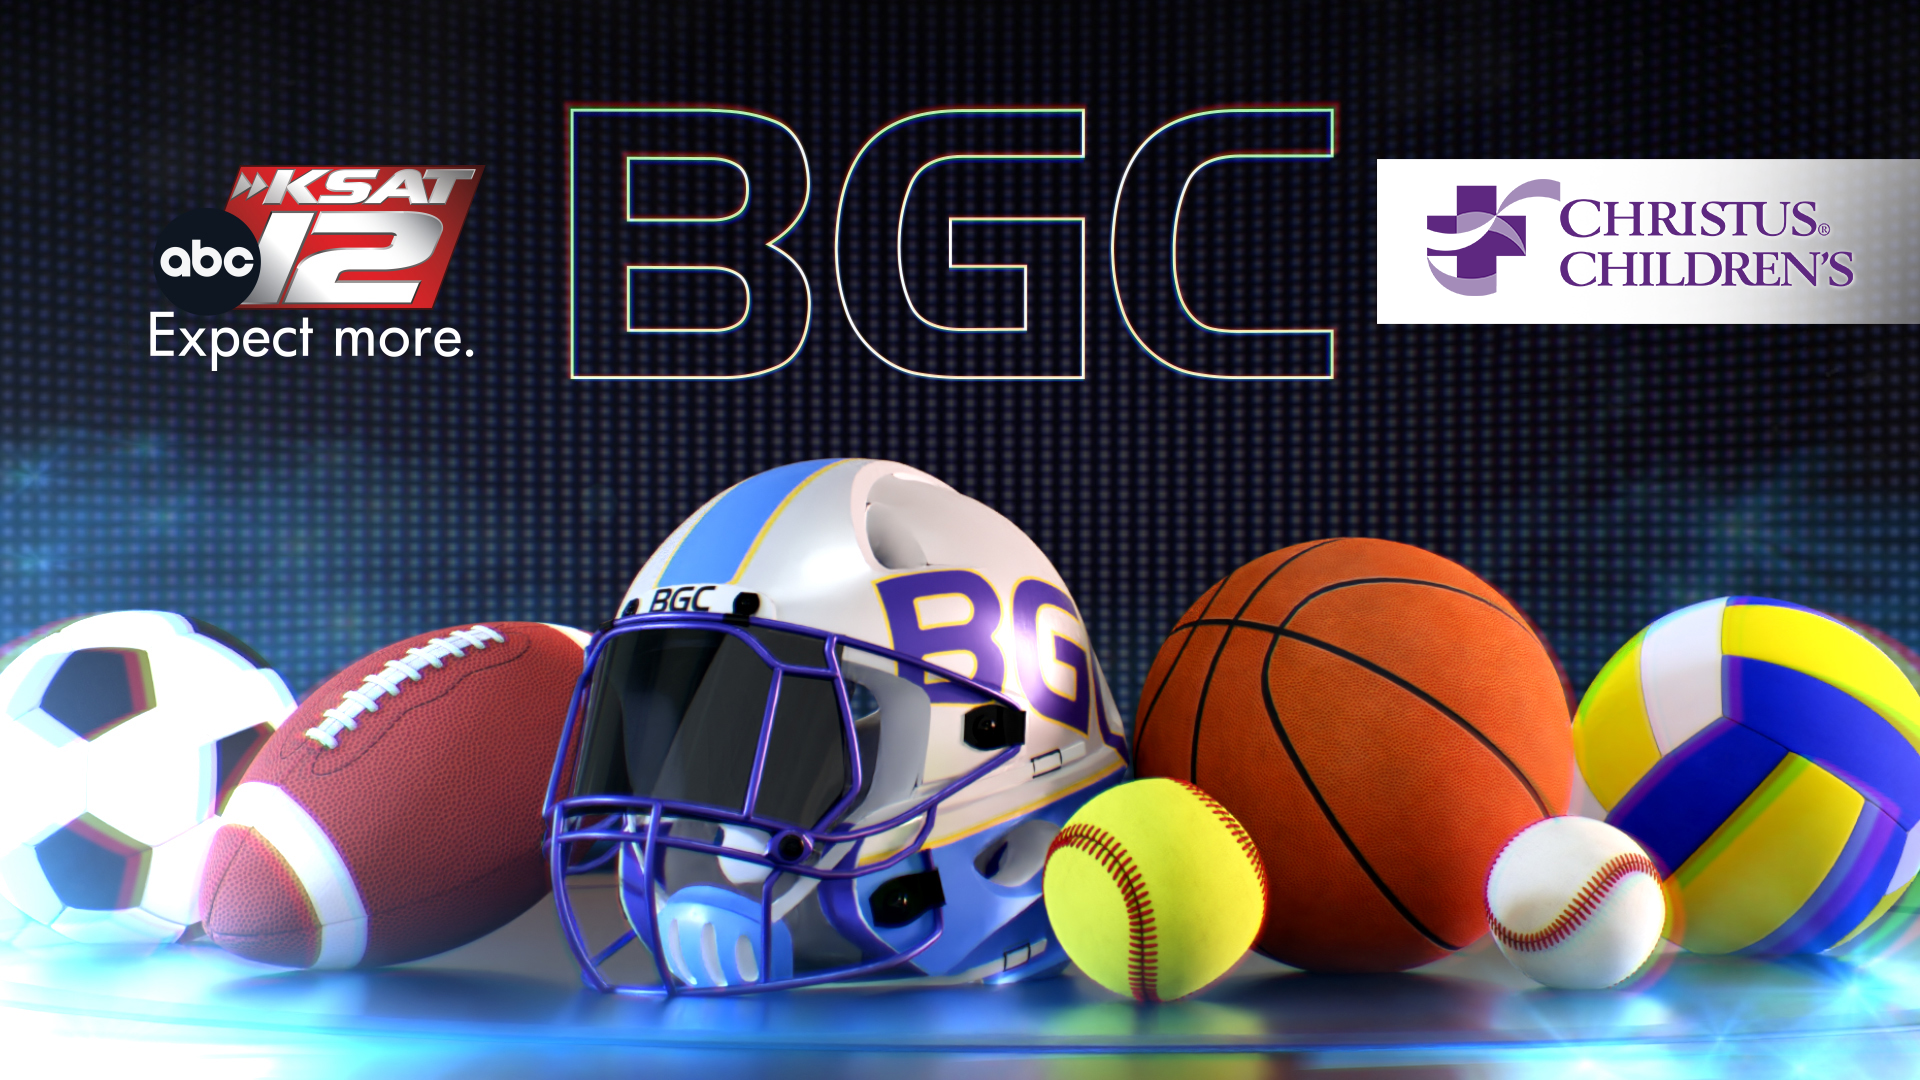 Download KSATs Big Game Coverage App to stream games, get real-time scores, highlights, schedules and more